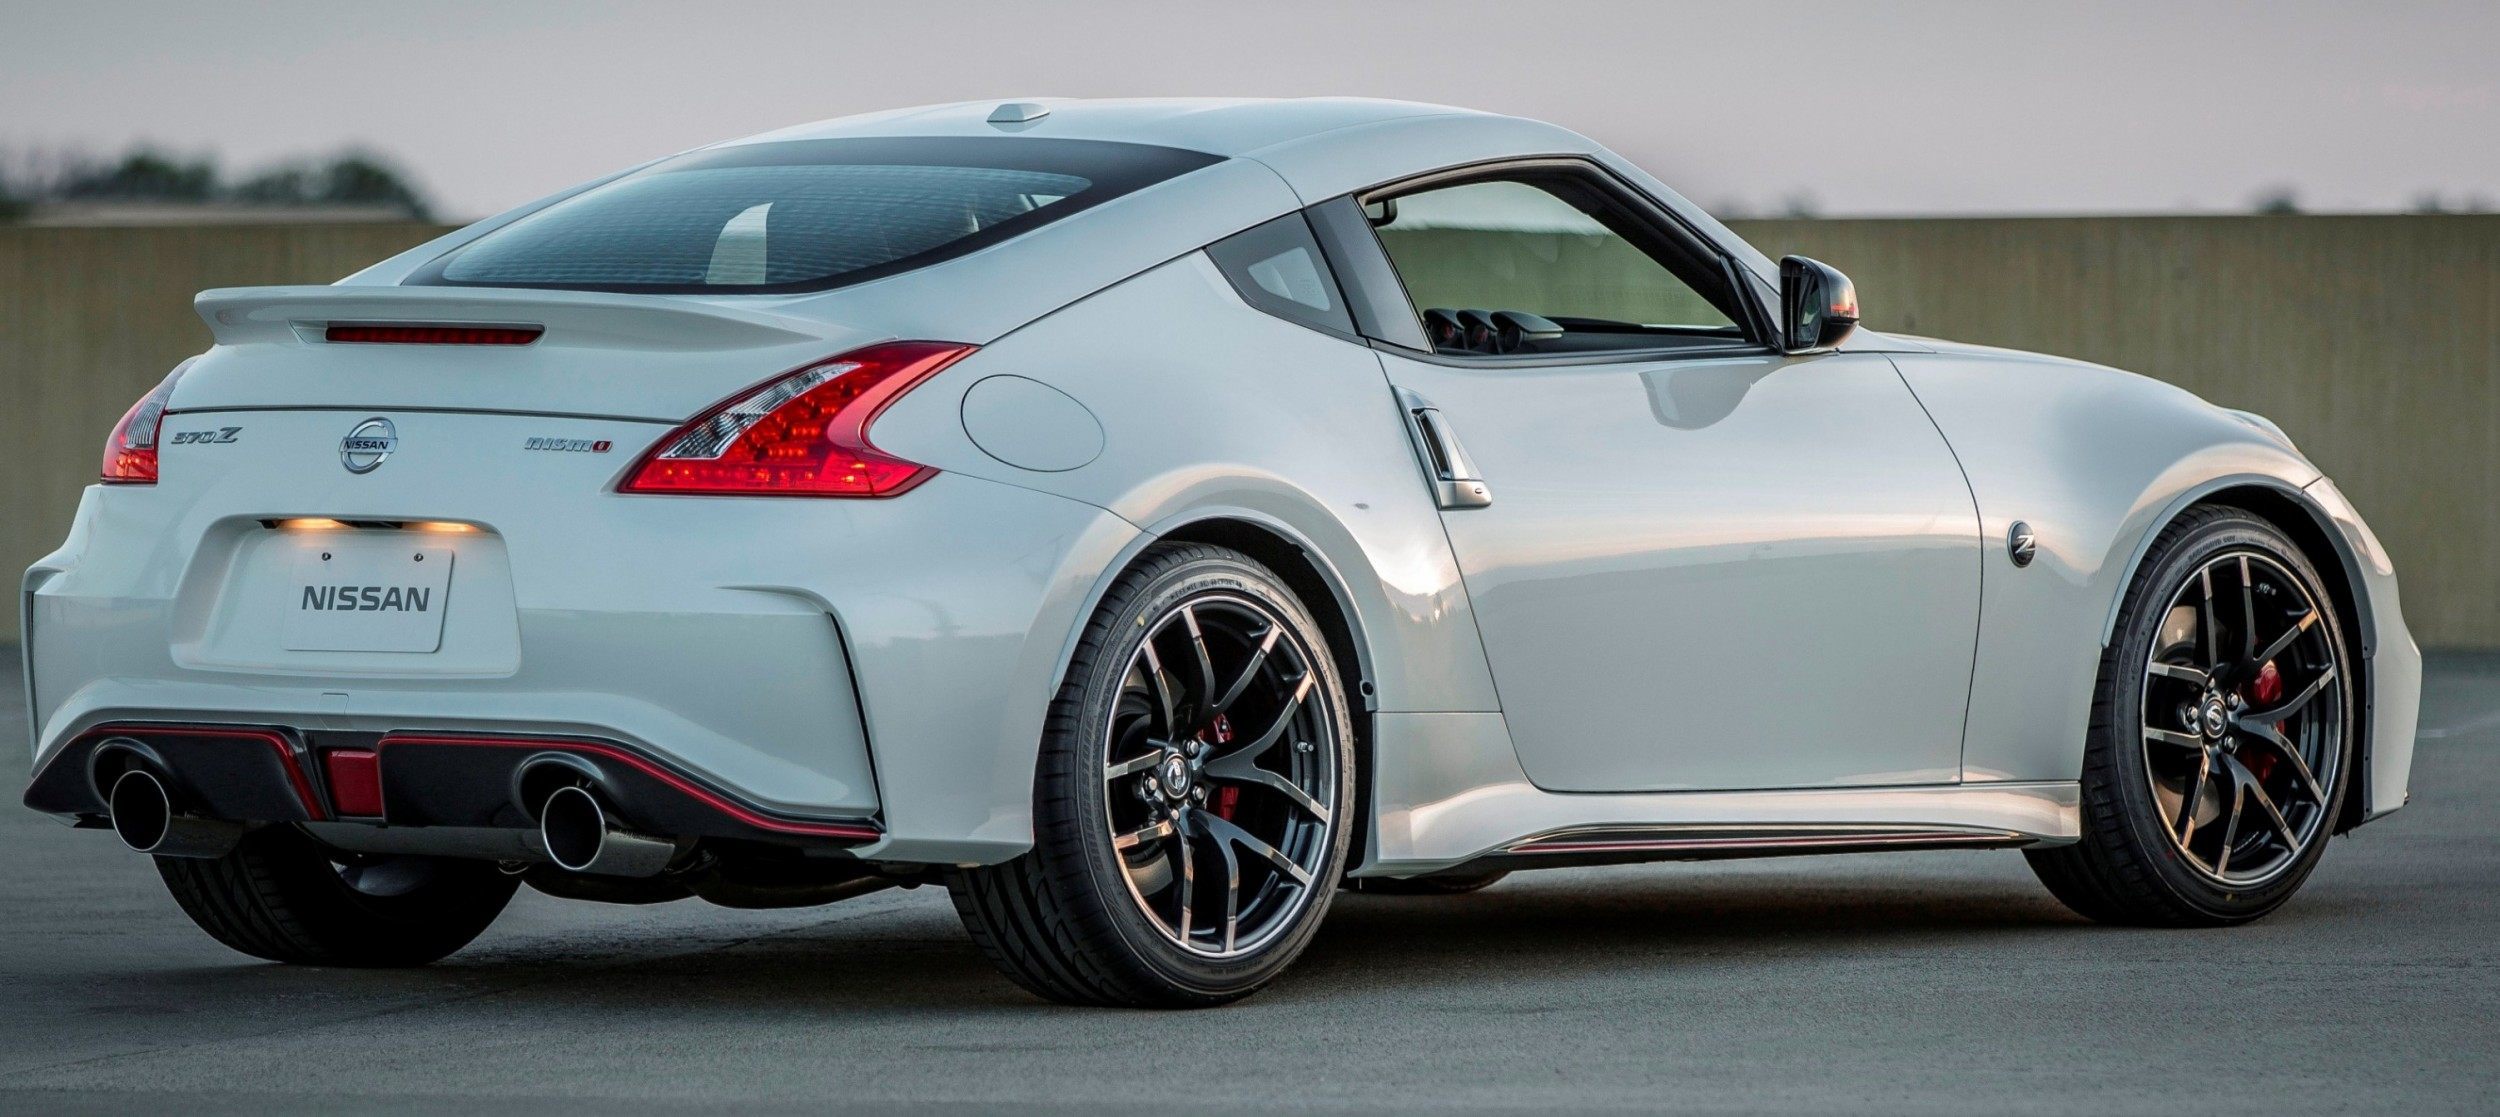 Update1 New Photos 2015 Nissan 370z Nismo Facelift Arrives In July